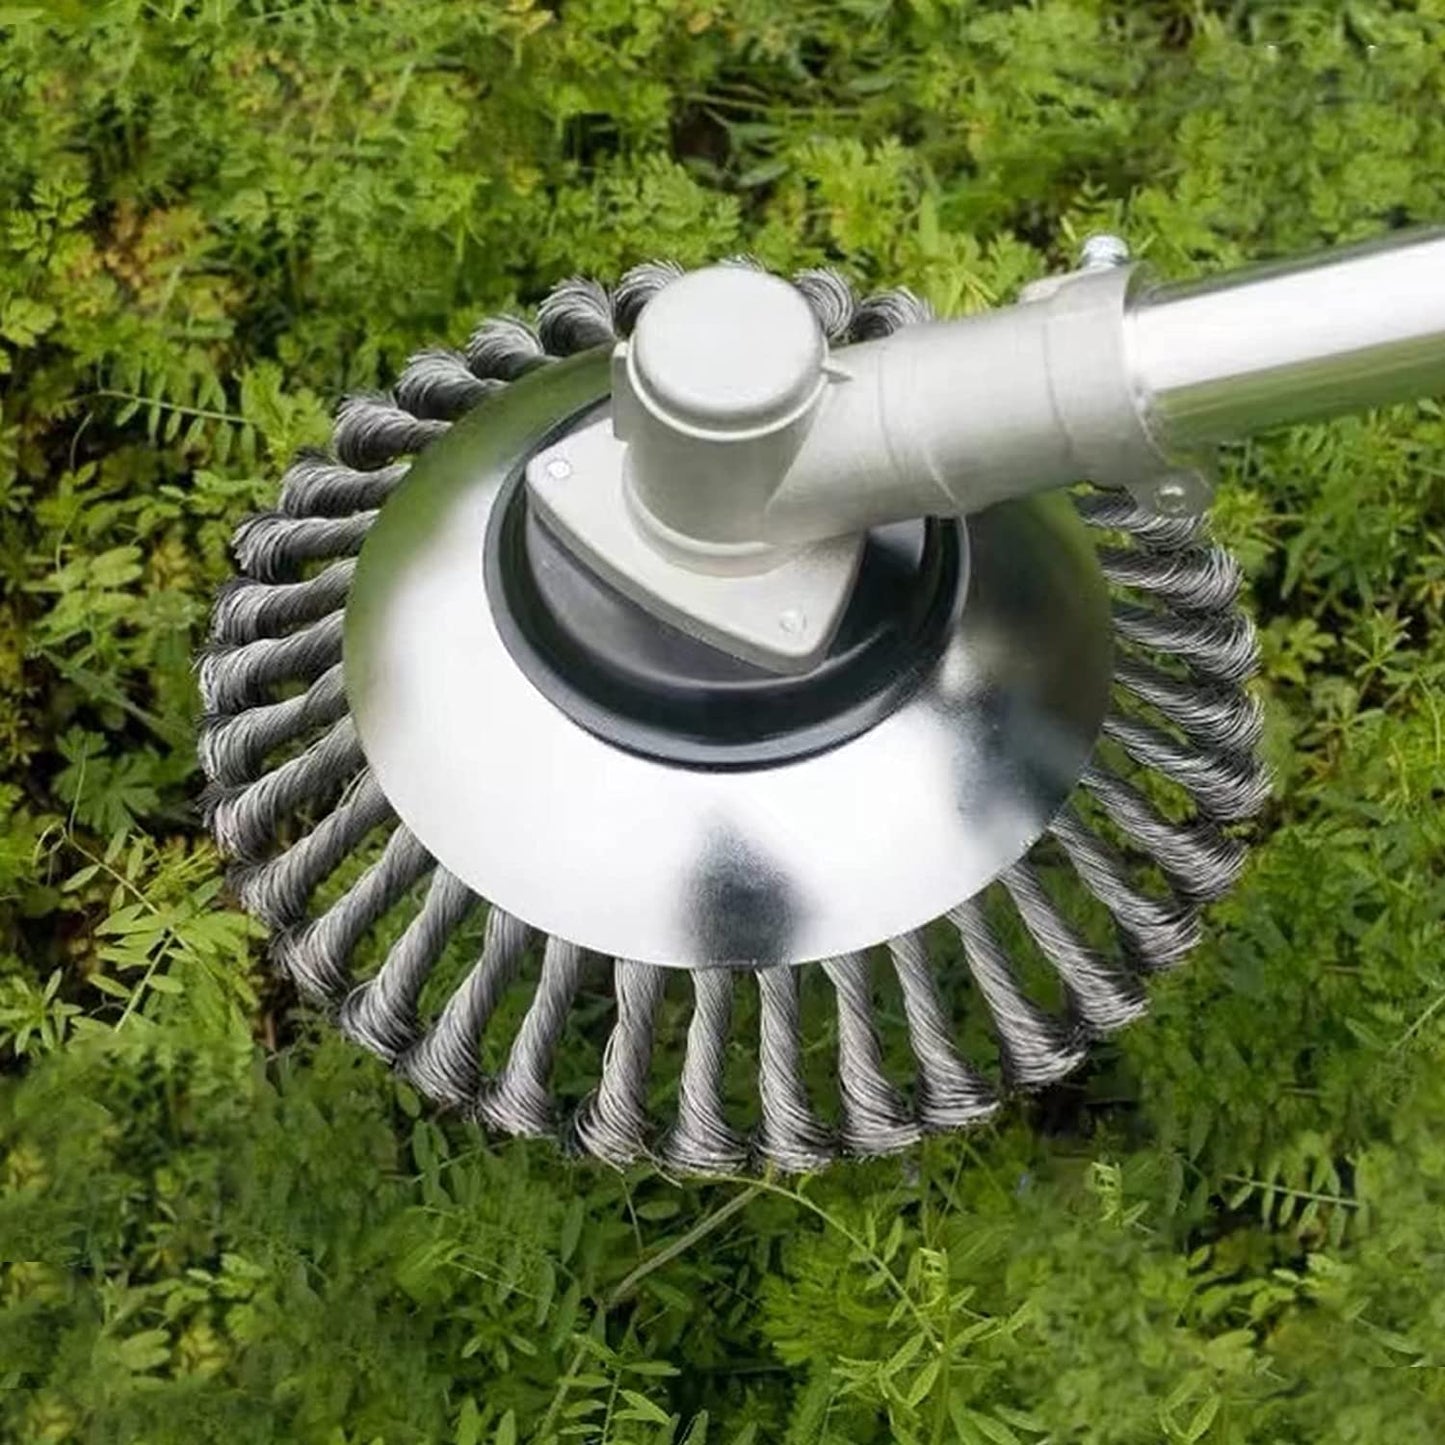 Wired Weed Trimmer Blade